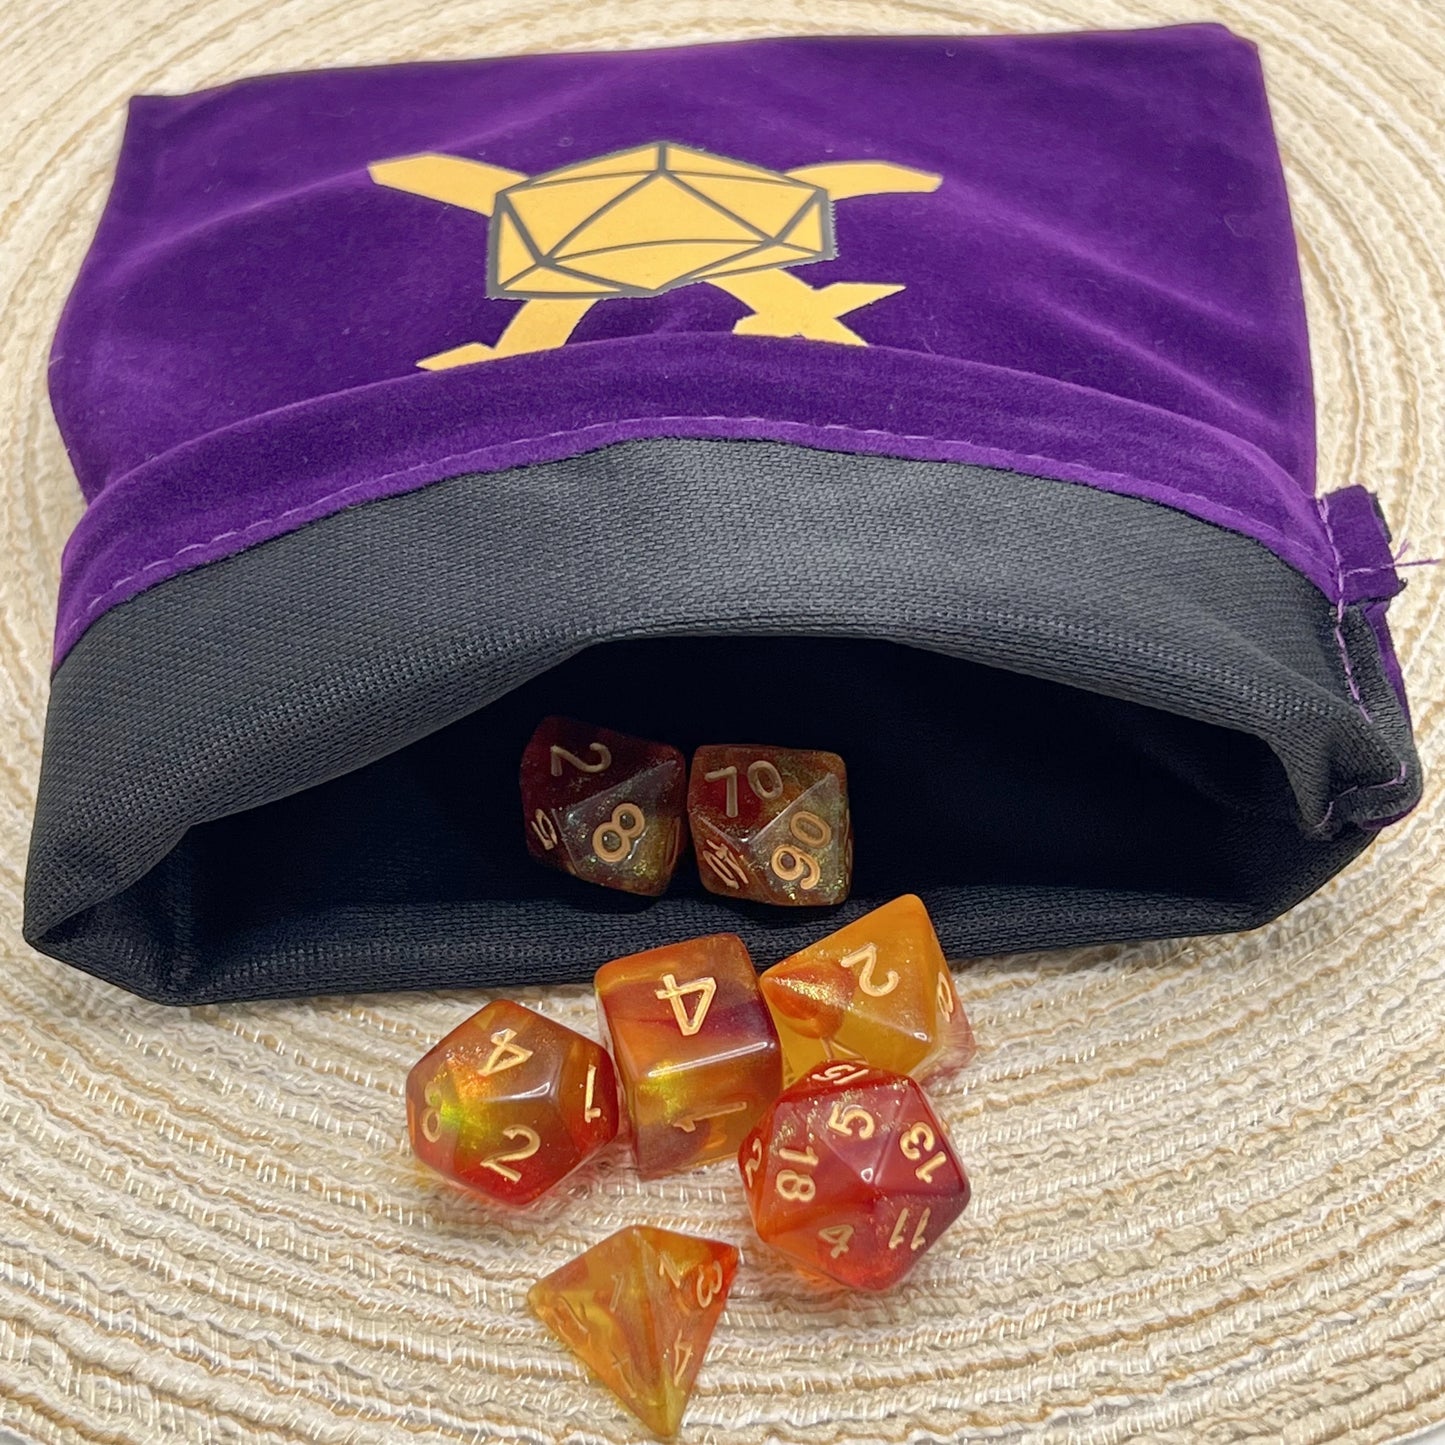 1PCS Dice Bag I Velvet Drawstring Pouch Ideal Size for Tarot Oracle Cards Dungeons and Dragons Accessories Runes Jewelry